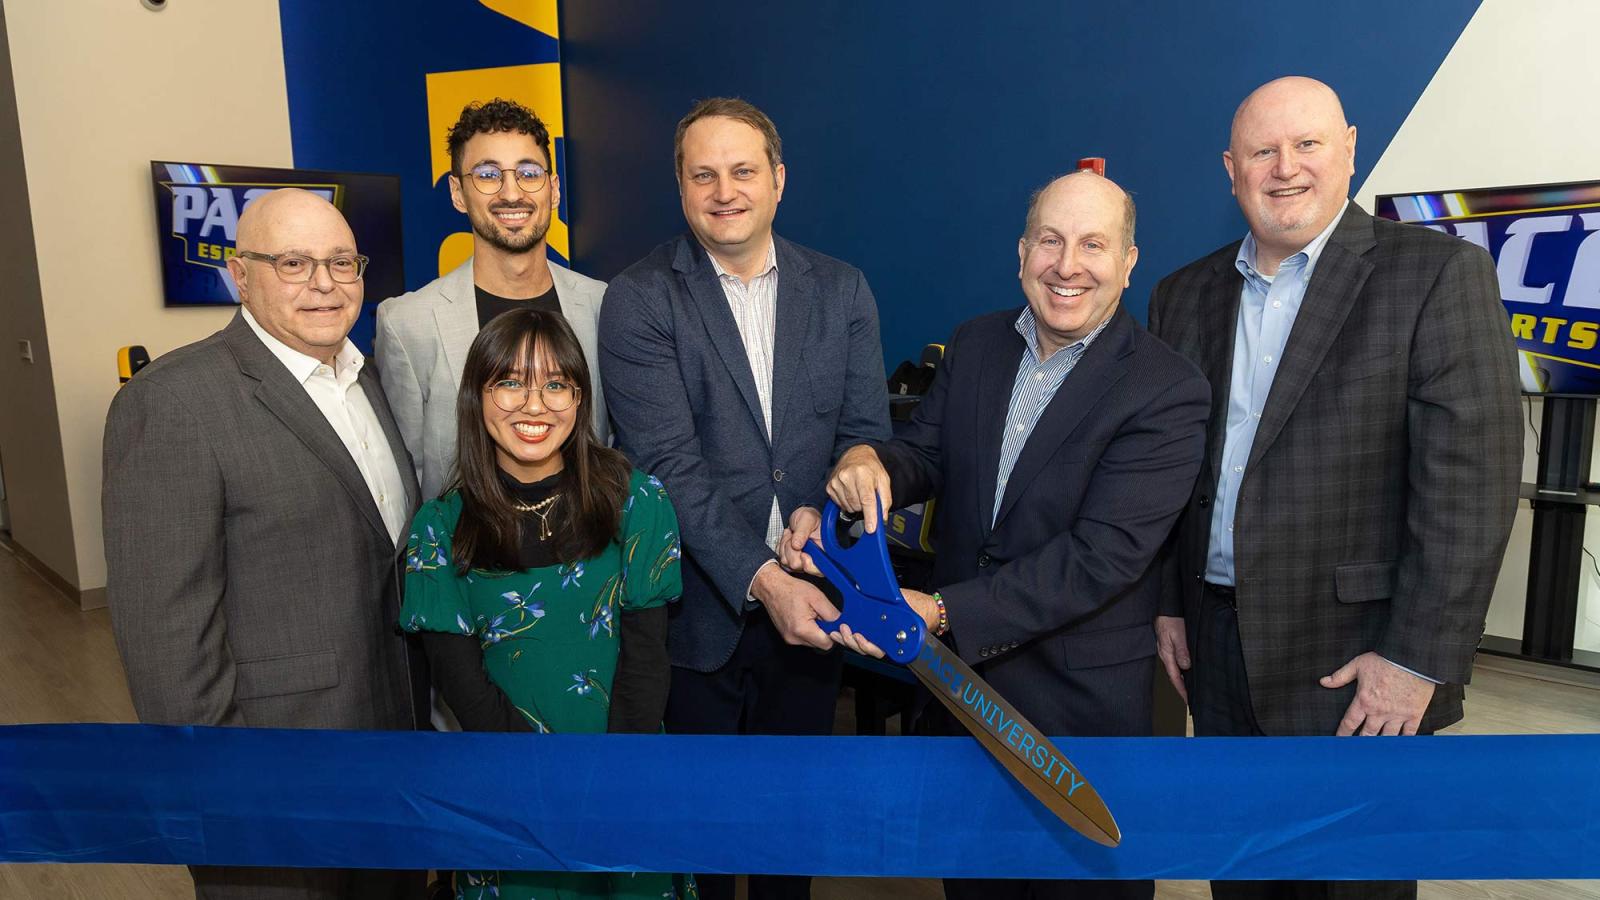 Ribbon Cutting Ceremony at the Pace University eSports arena